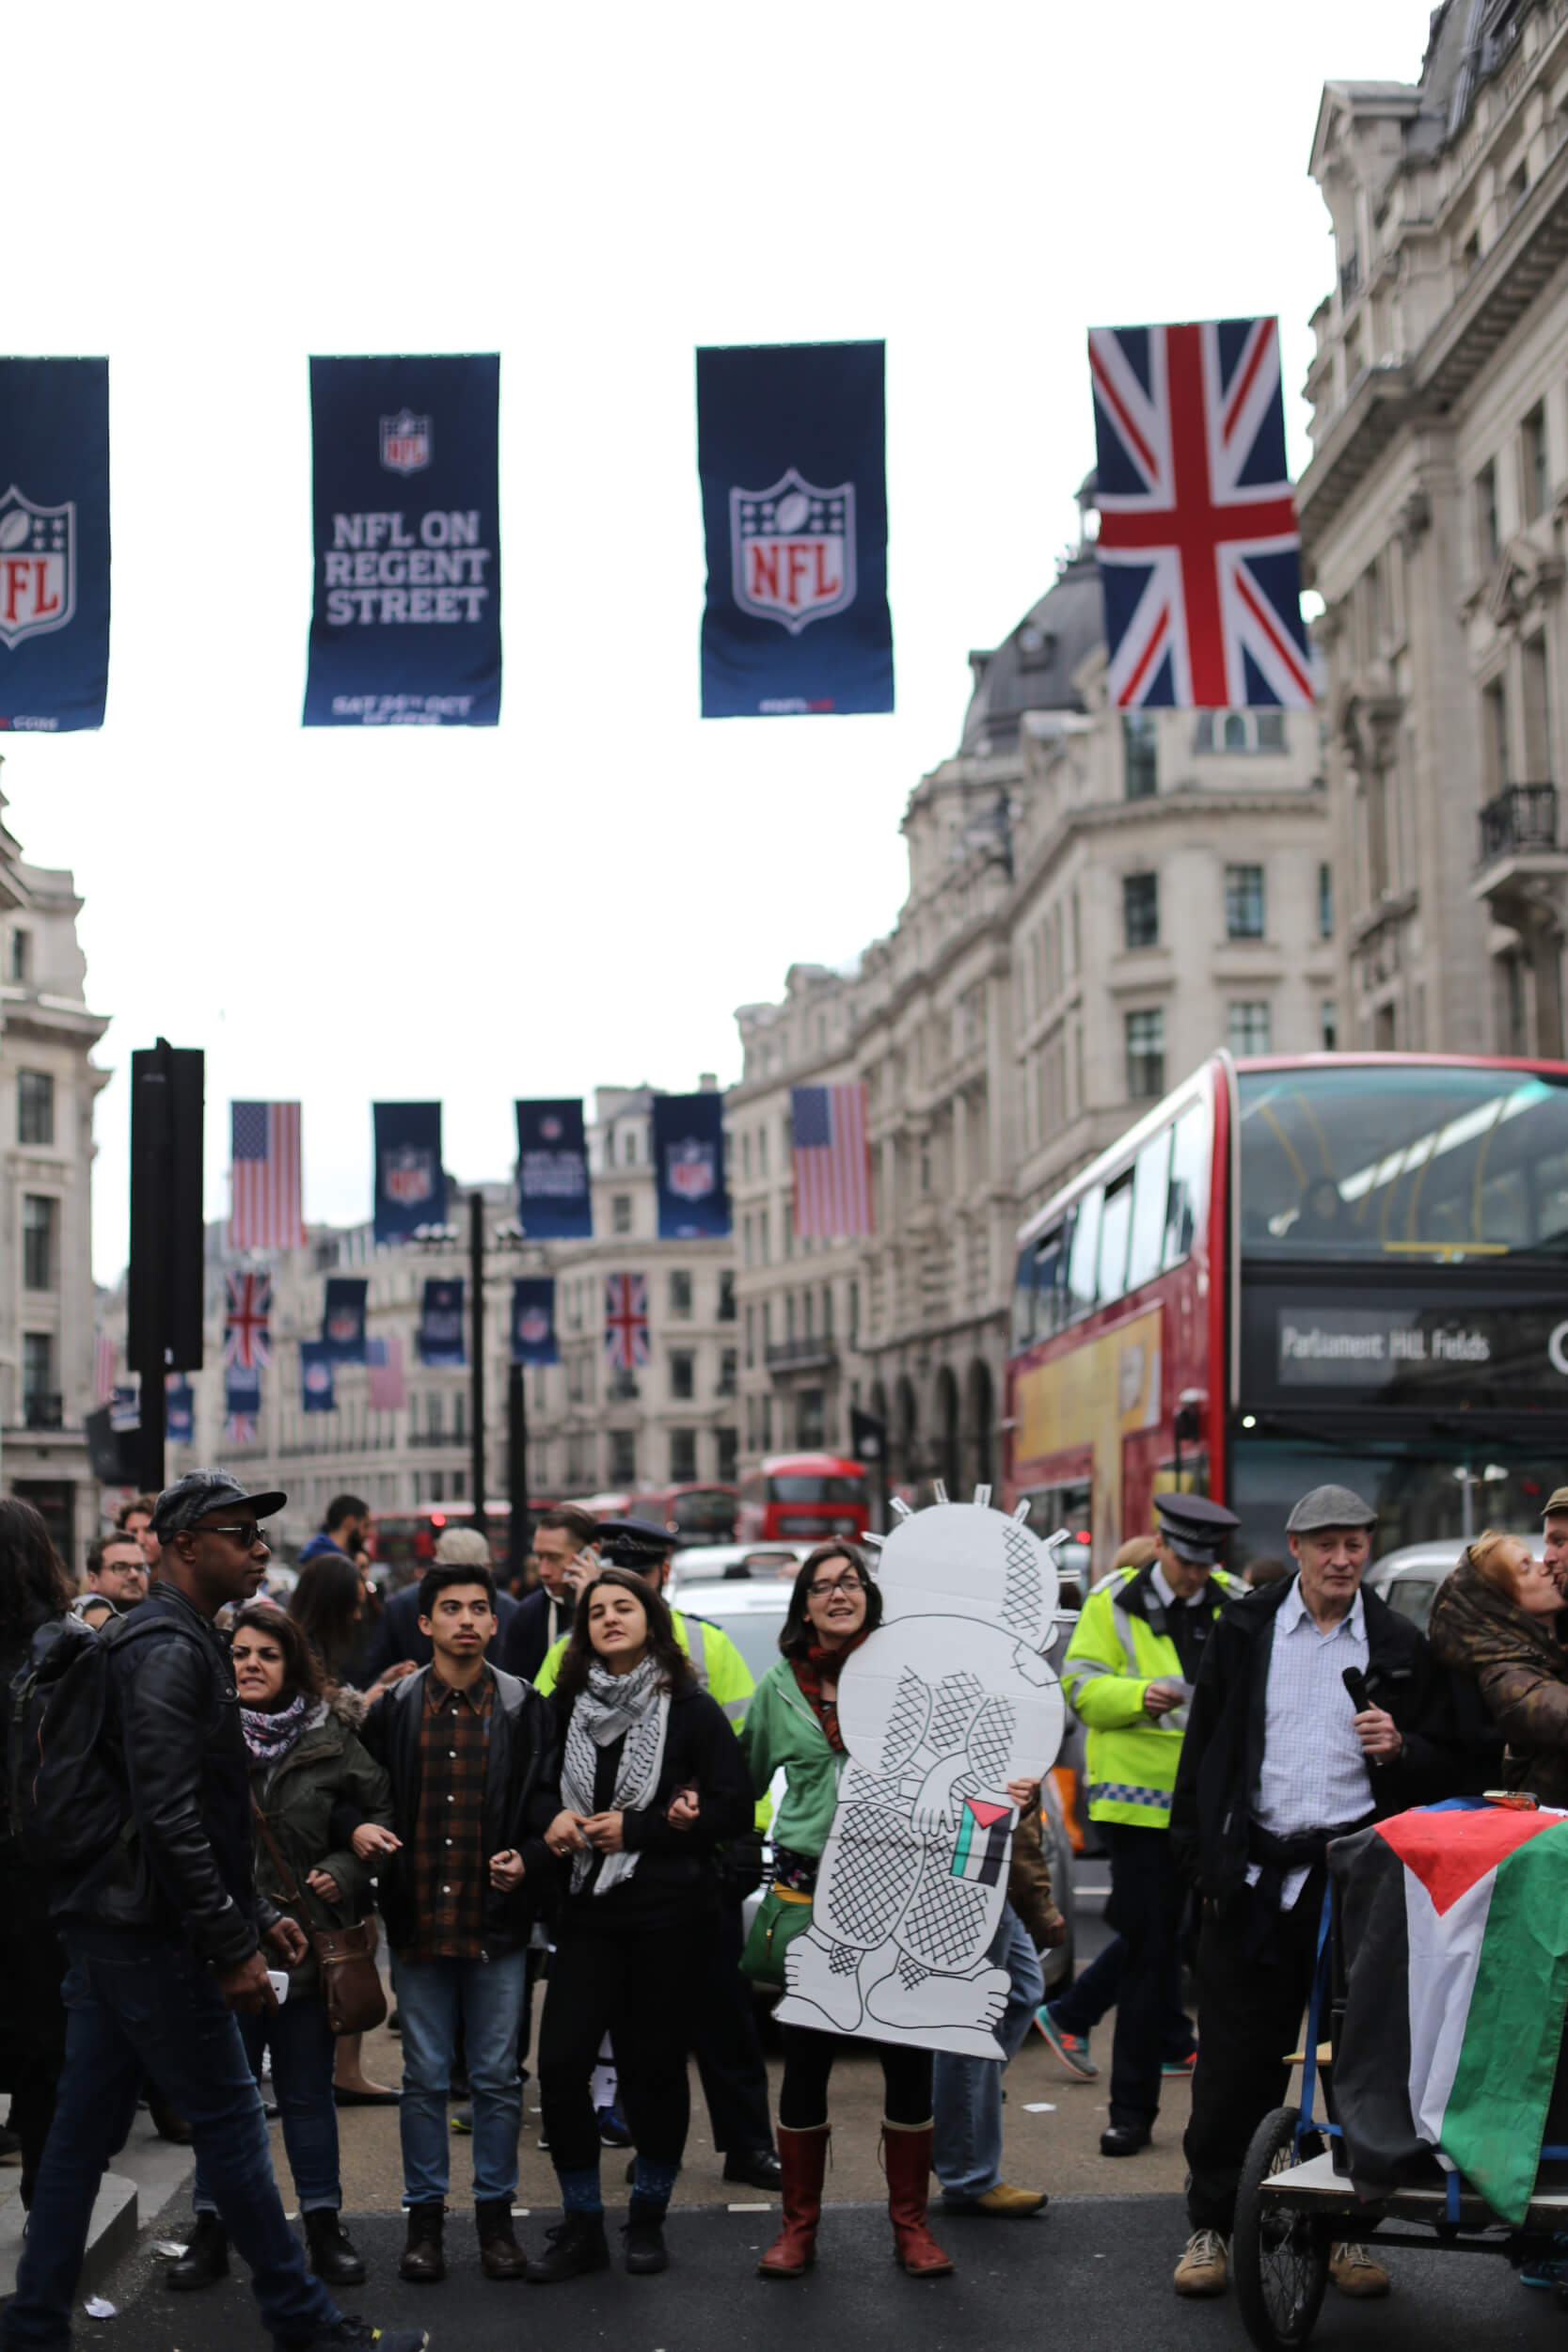 Protesters link arms stopping traffic on Oxford Street. Some hold representations of Handala, a creation of the late Palestinian cartoonist Nagi Al-Ali. Handala bears witness to the Israeli oppression of the Palestinian people. (Photo: Sara Anna)